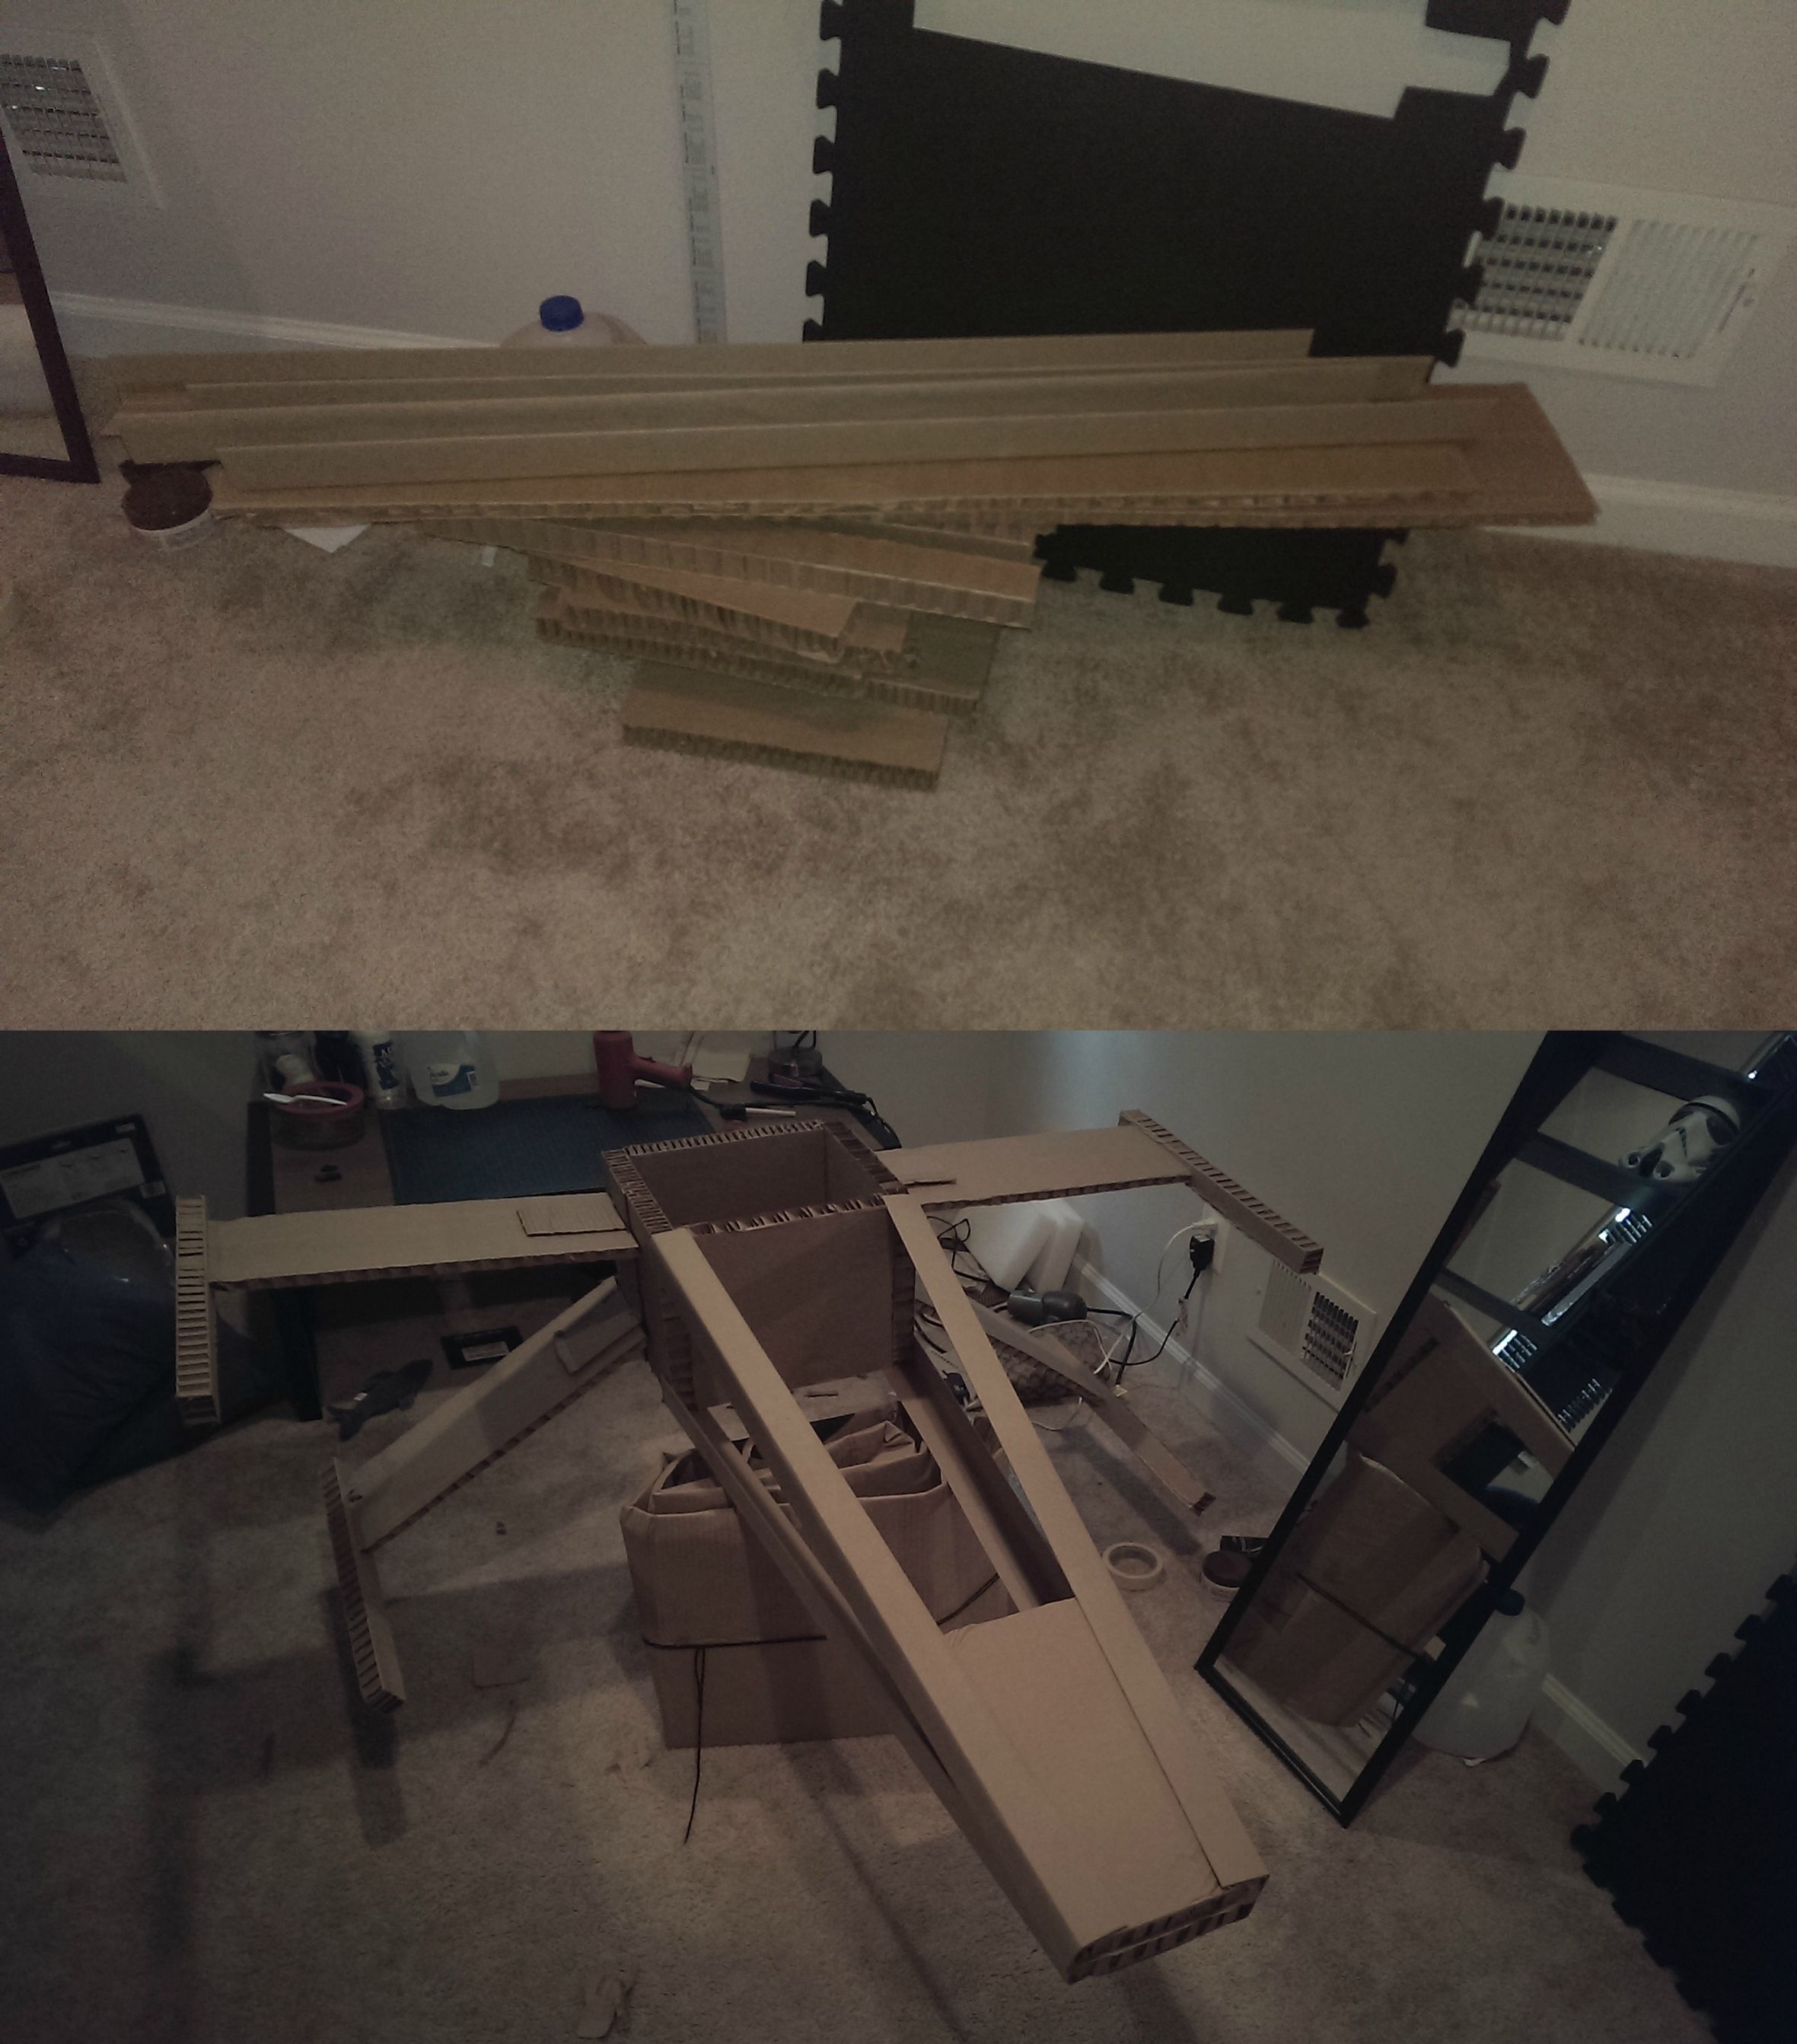 Girlfriend asked me to throw away the box and packaging stuffs from our new bed frame before leaving for work, I did her one better.